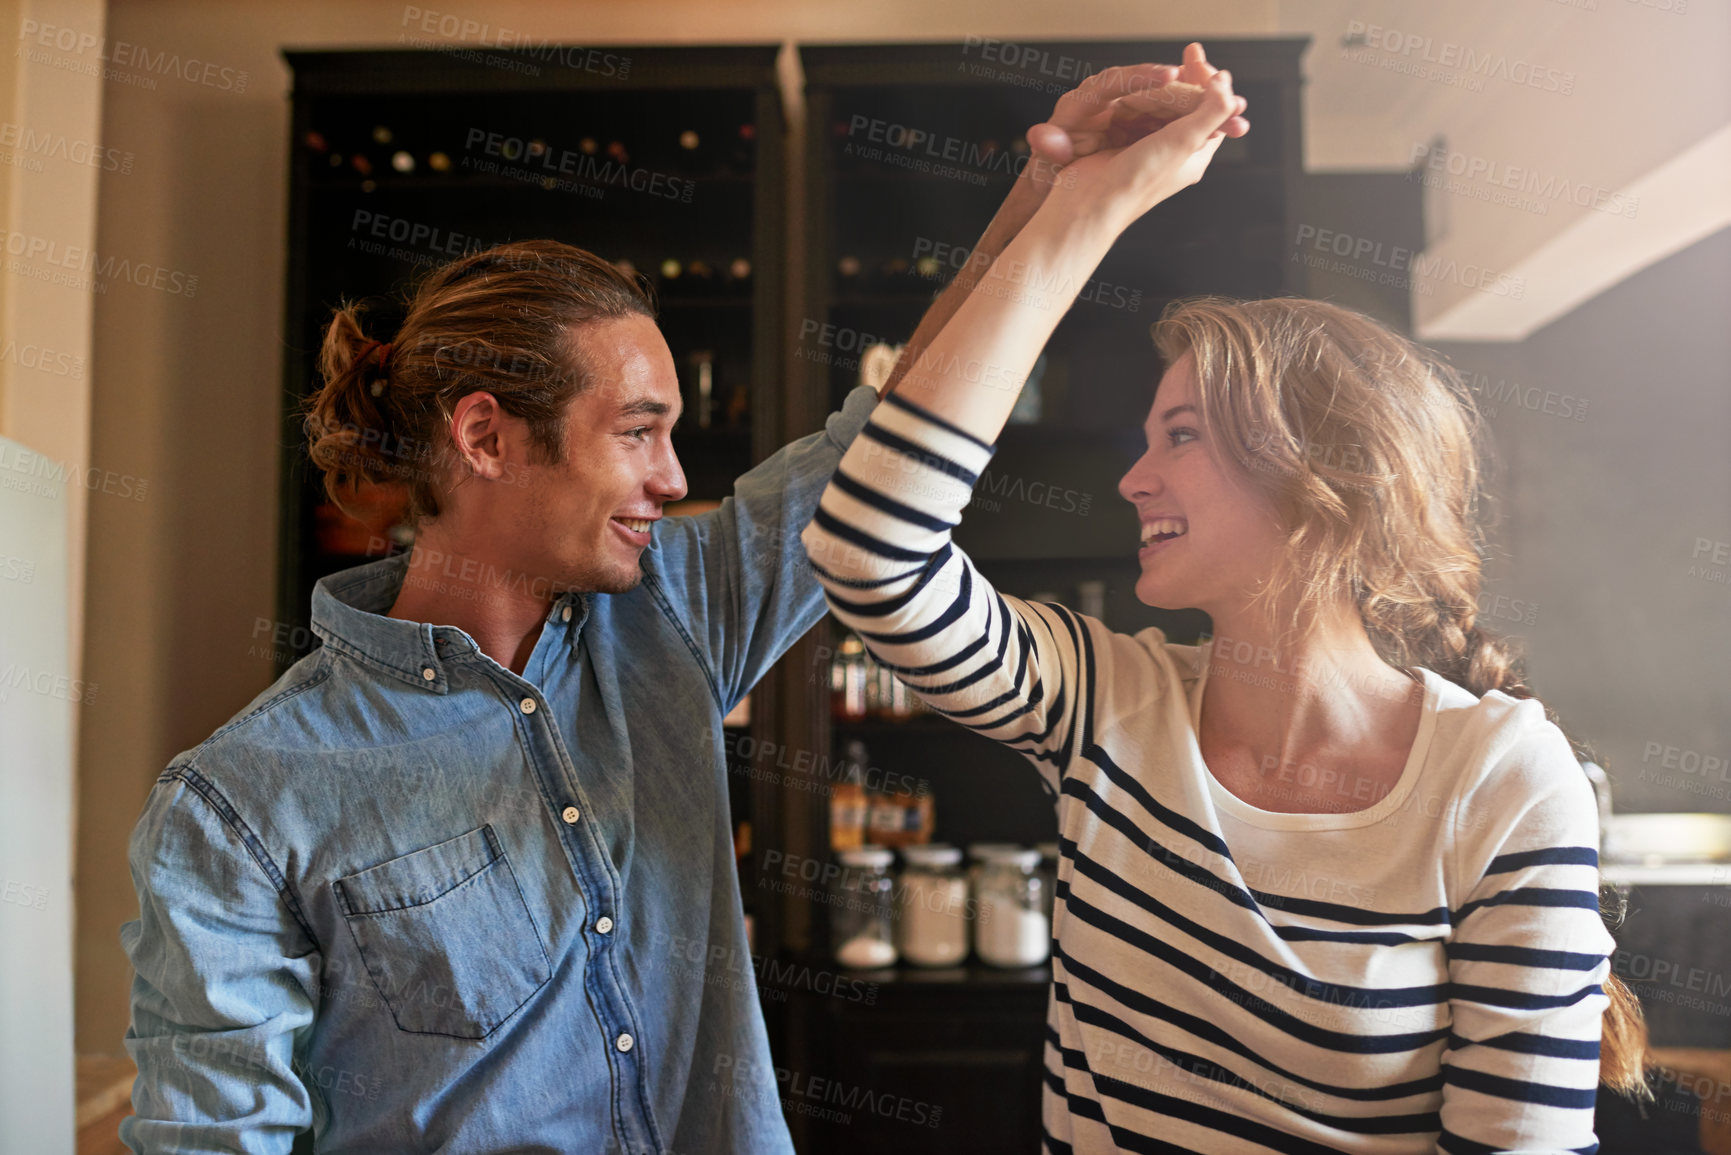 Buy stock photo Shot of a young couple dancing in the kitchen